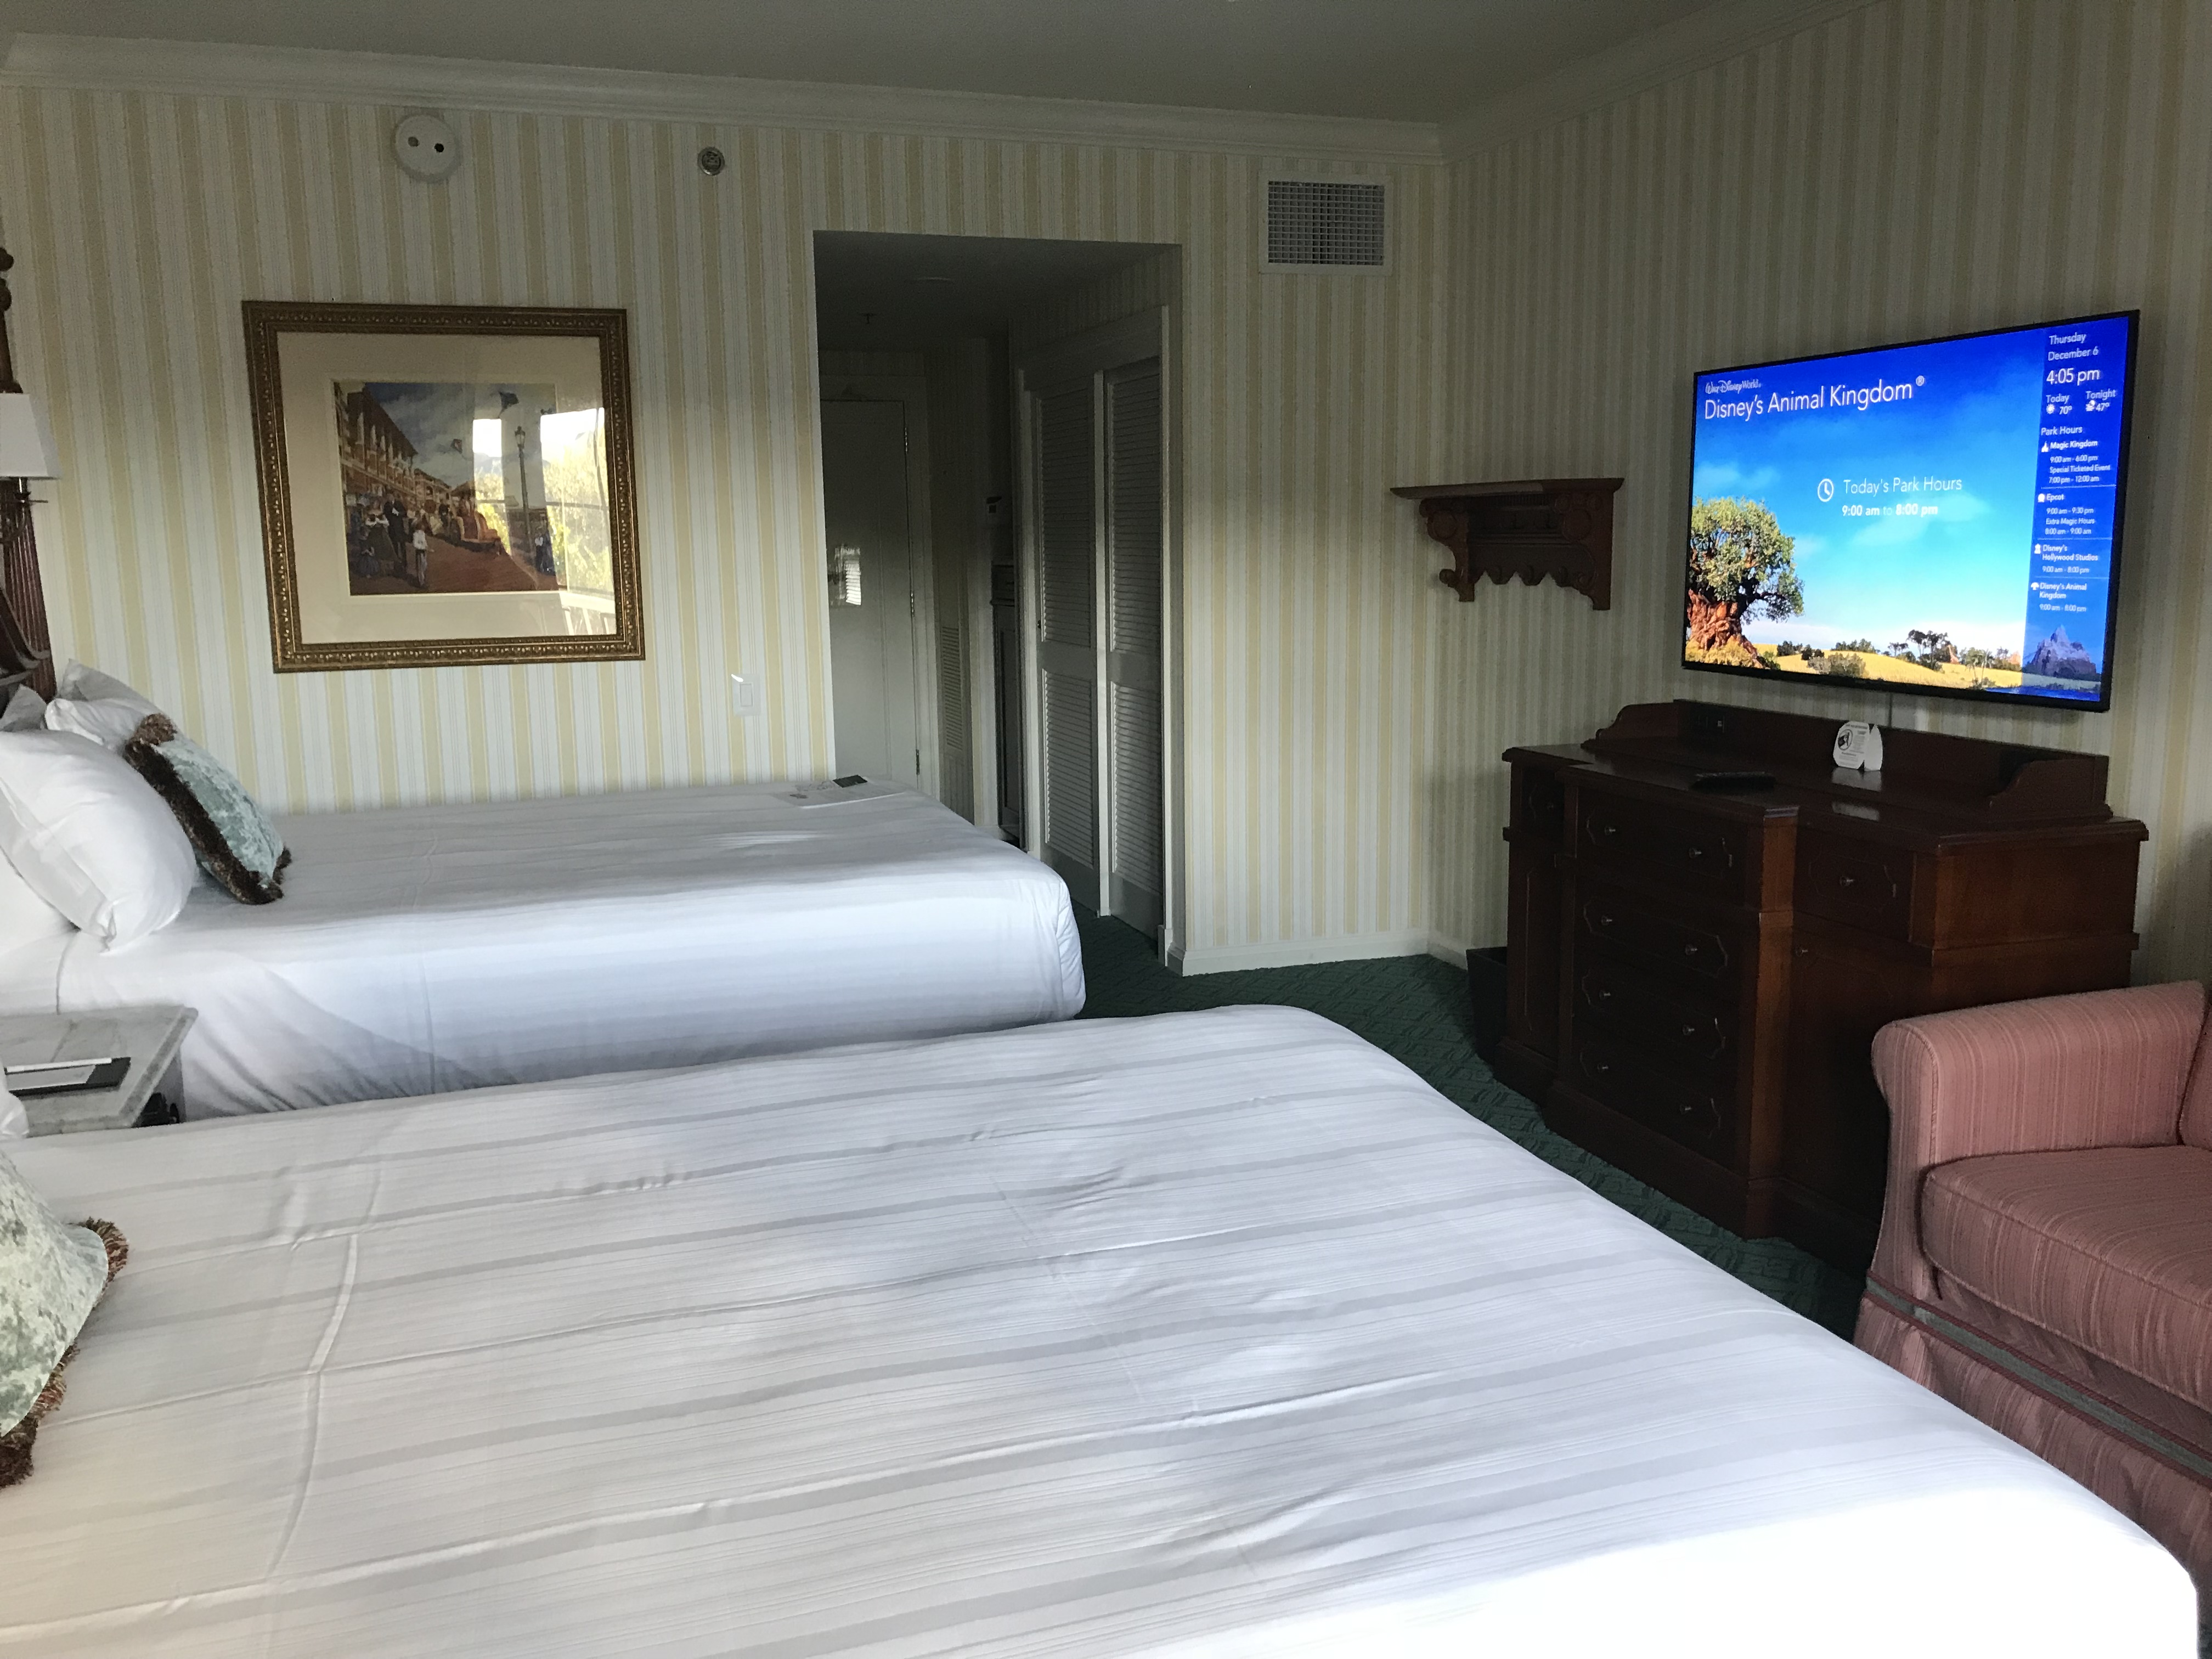 Where To Stay For runDisney – The Boardwalk